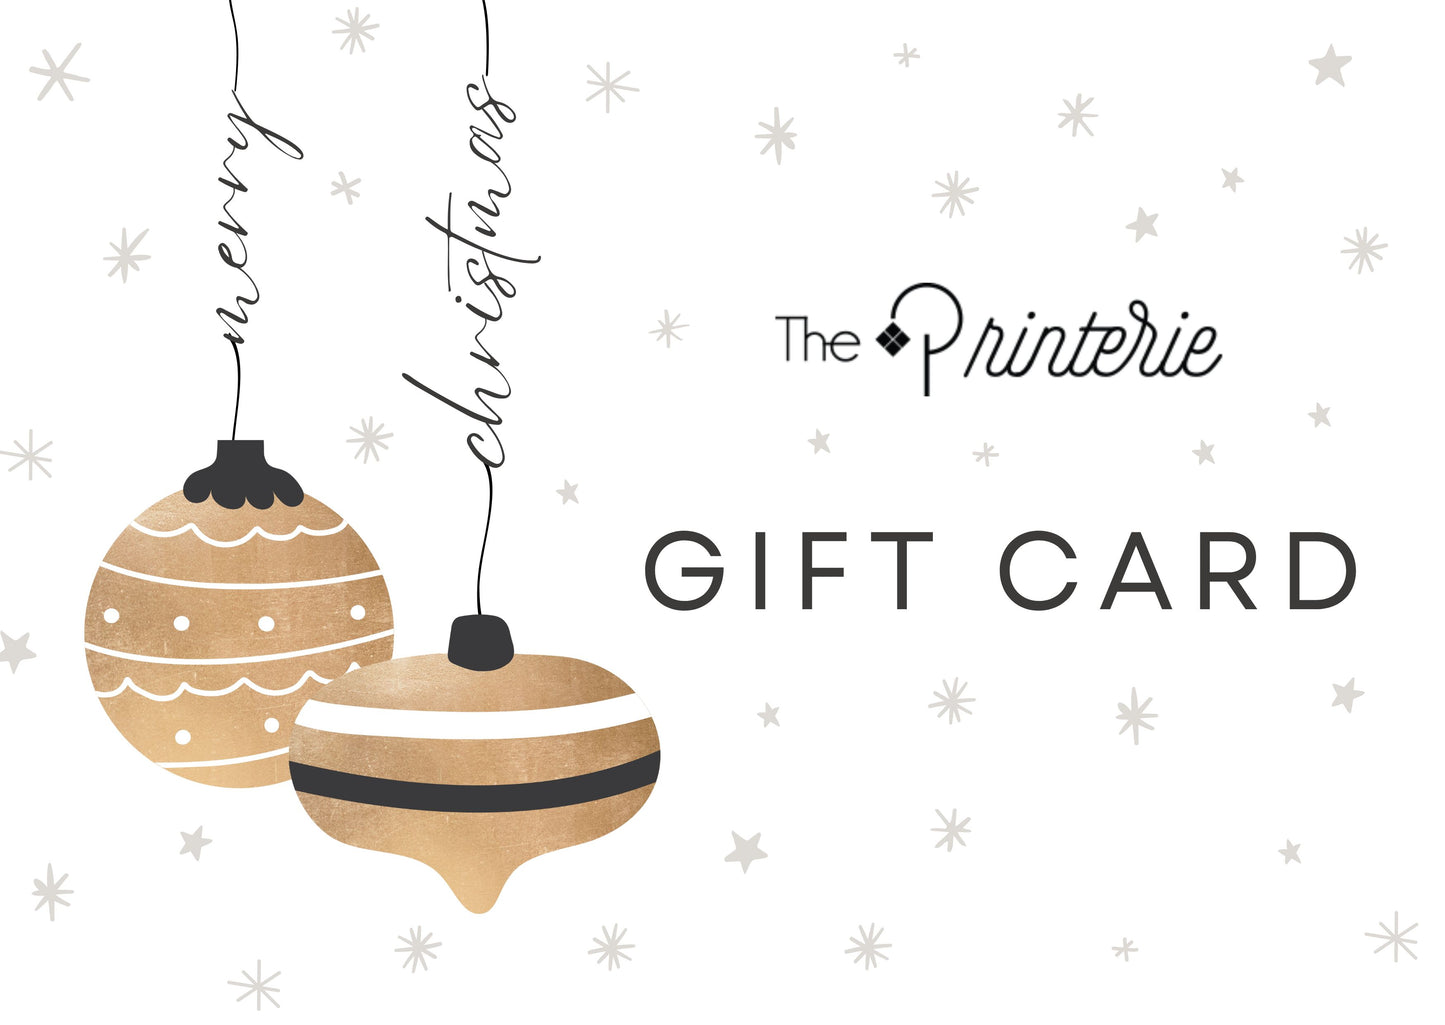 The Printerie Holiday Gift Card